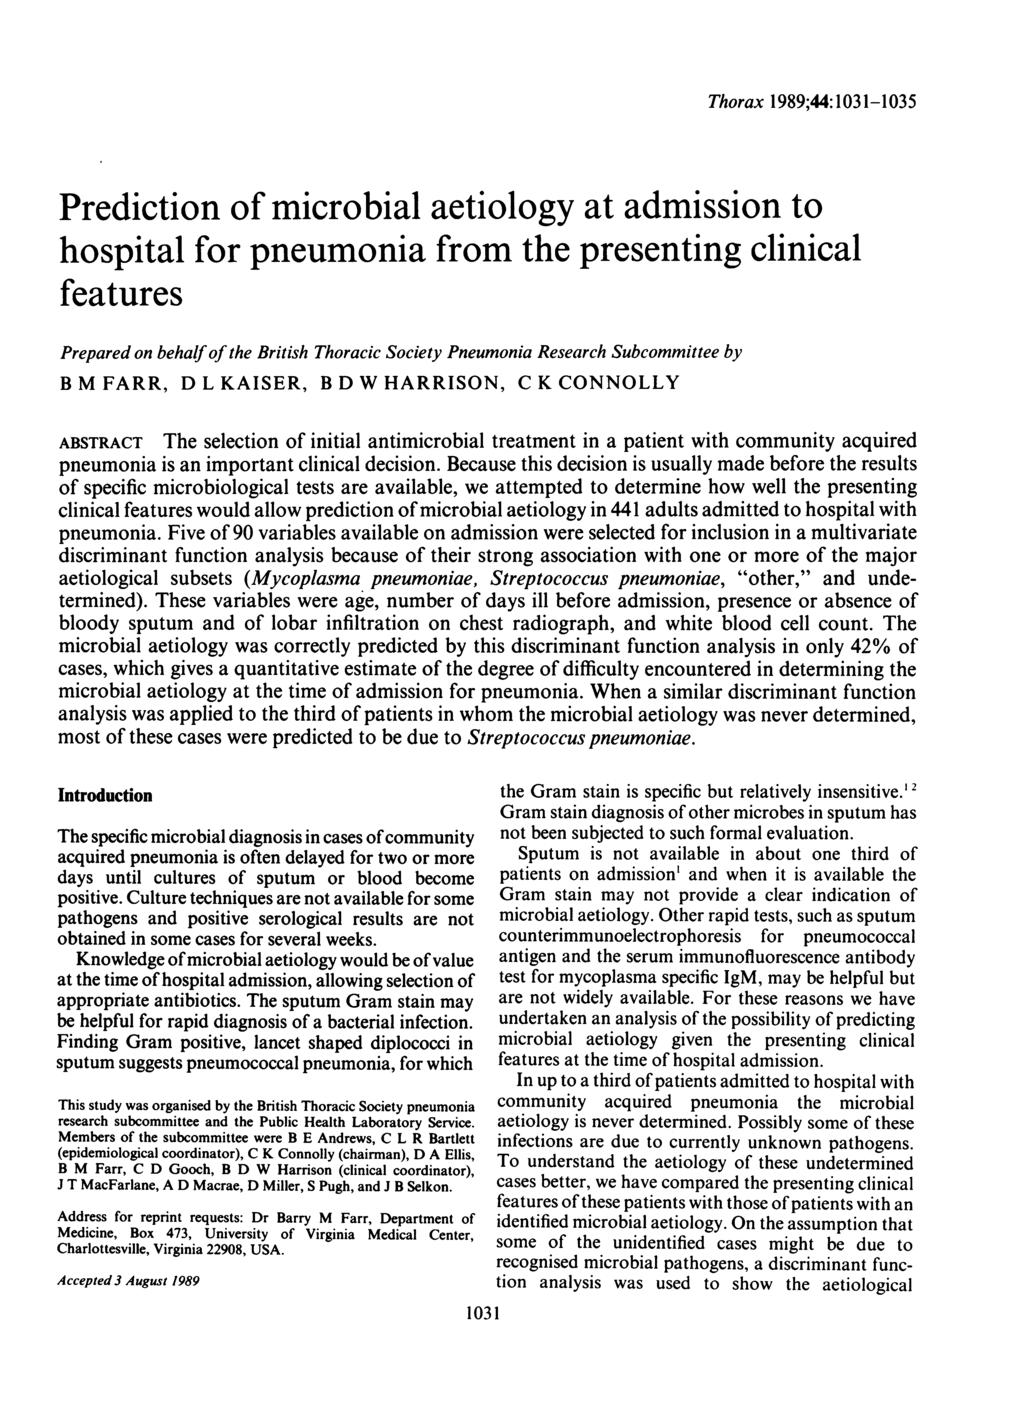 Thorax 1989;44:1031-1035 Prediction of microbial aetiology at admission to hospital for pneumonia from the presenting clinical features Prepared on behalf of the British Thoracic Society Pneumonia